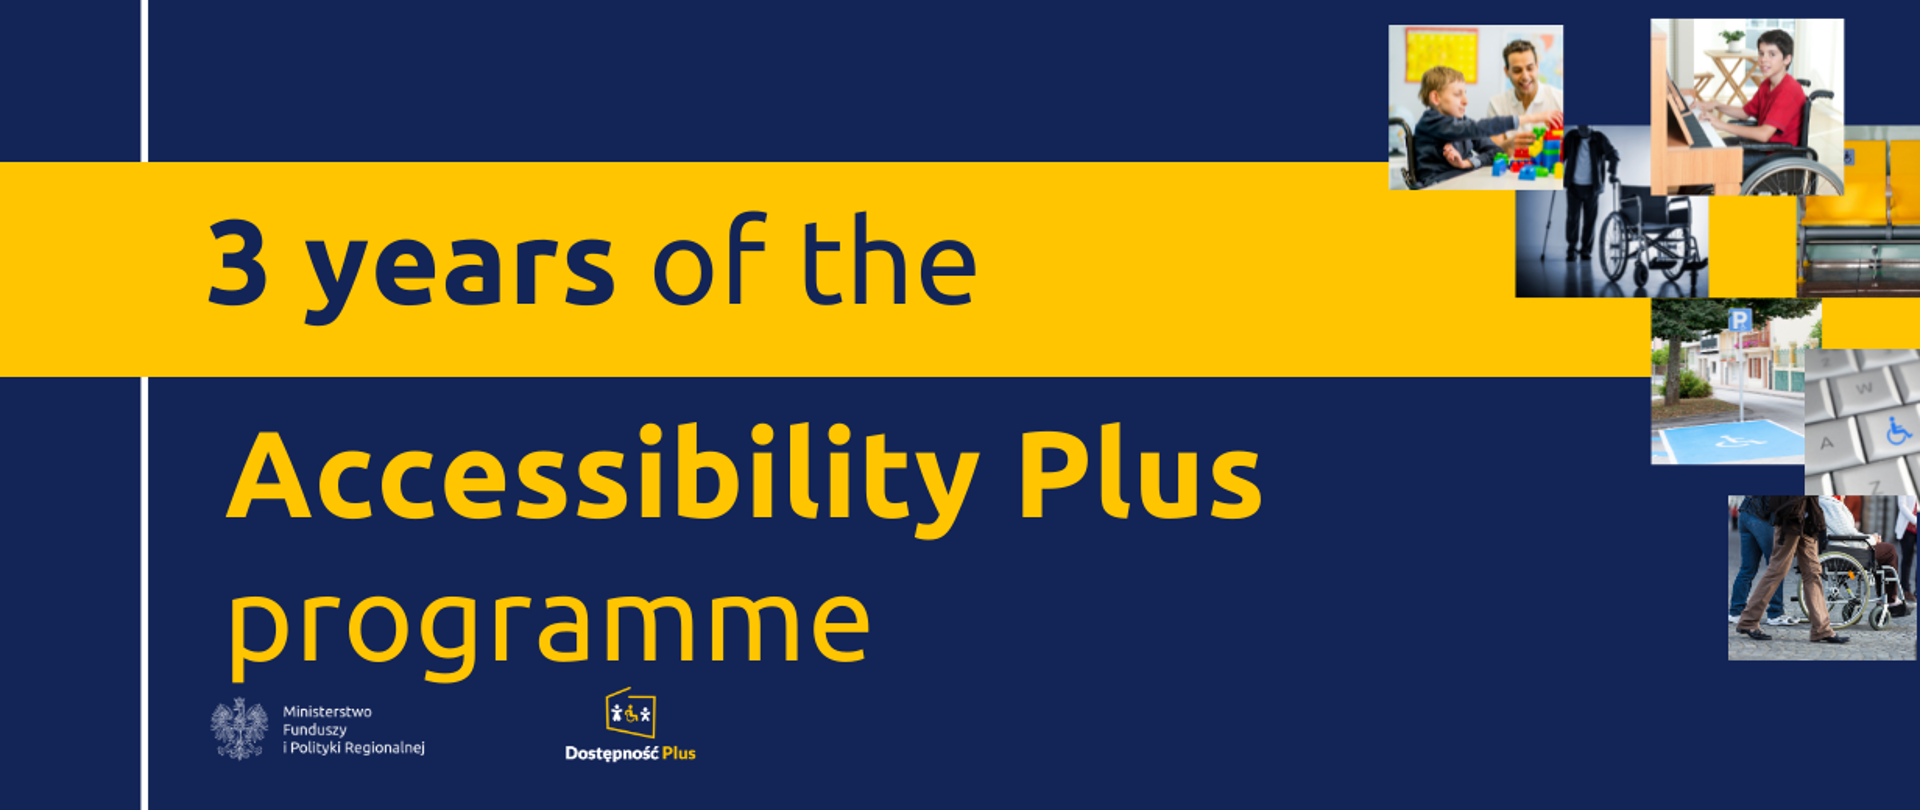 3 years of the Accessibility Plus programme